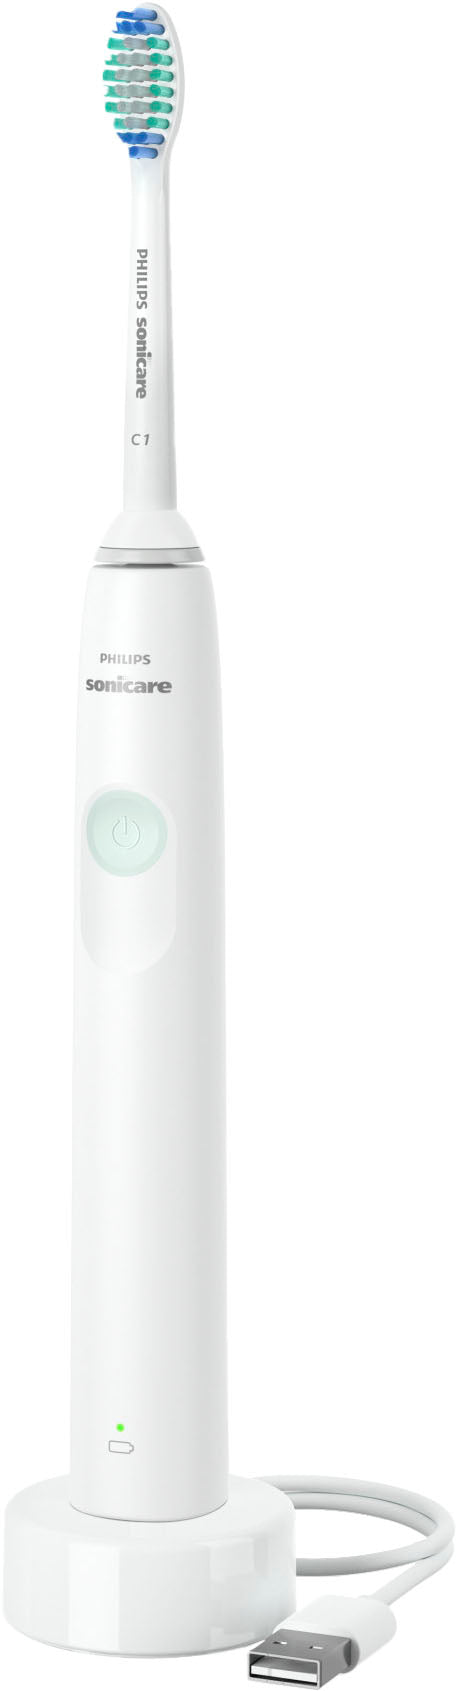 Philips Sonicare - 2100 Power Toothbrush, Rechargeable Electric Toothbrush - White Mint_1